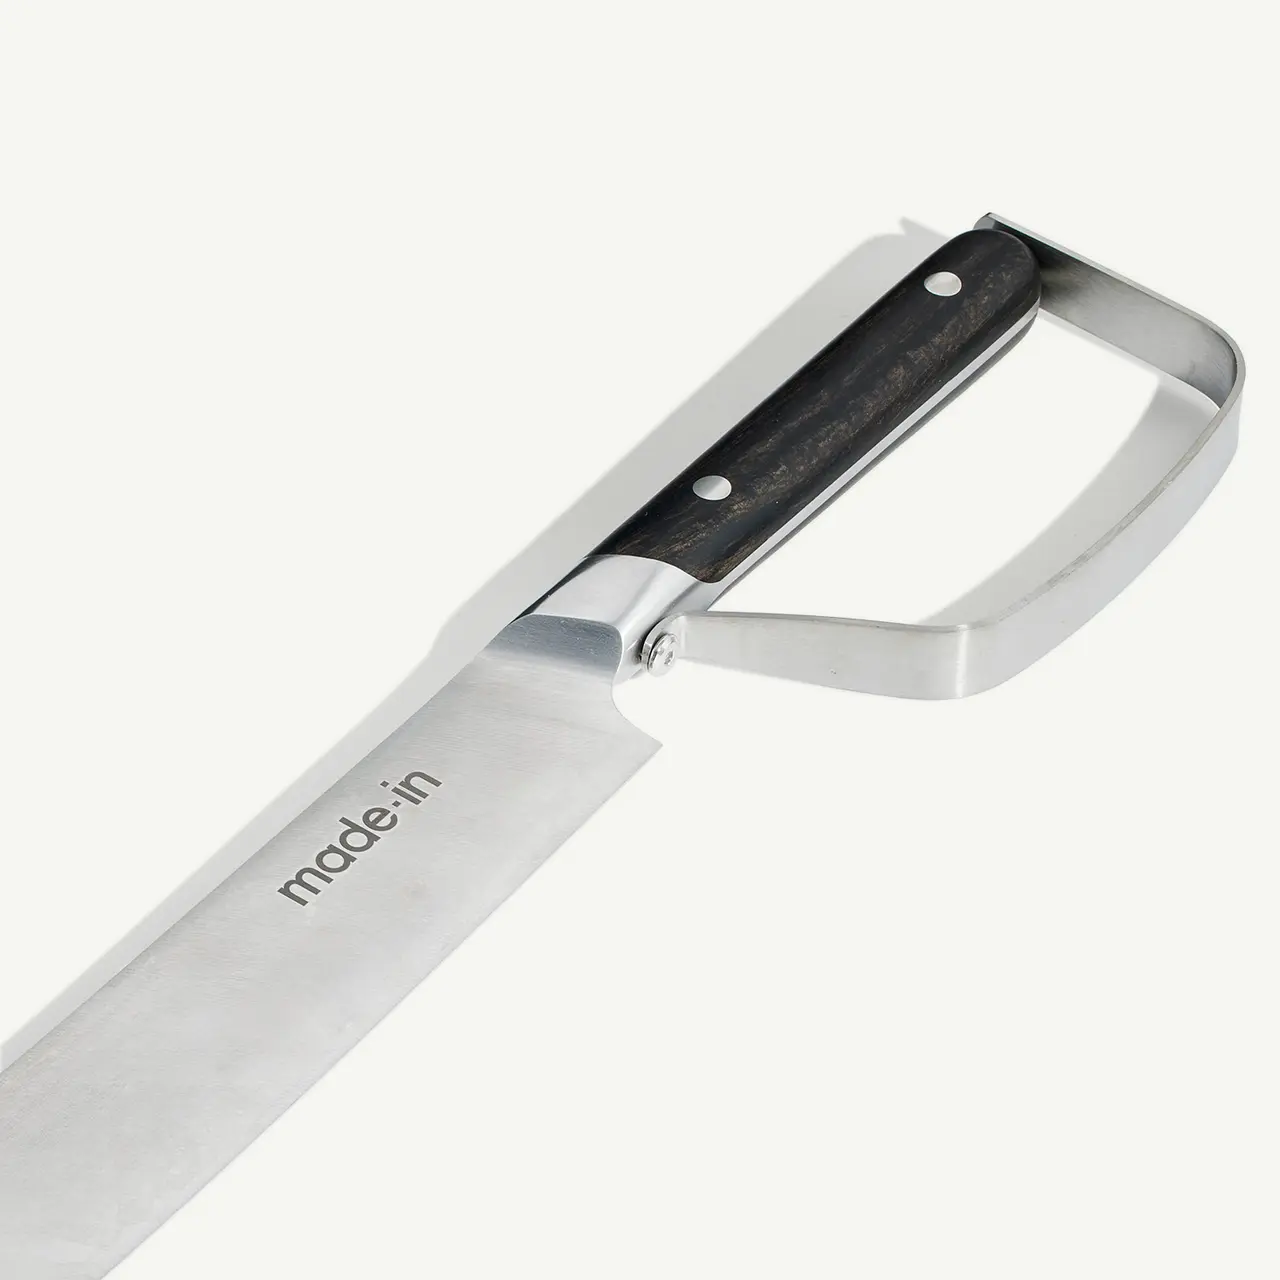 A close-up of a stainless steel kitchen knife with a black handle and the brand "made.in" engraved on the blade.